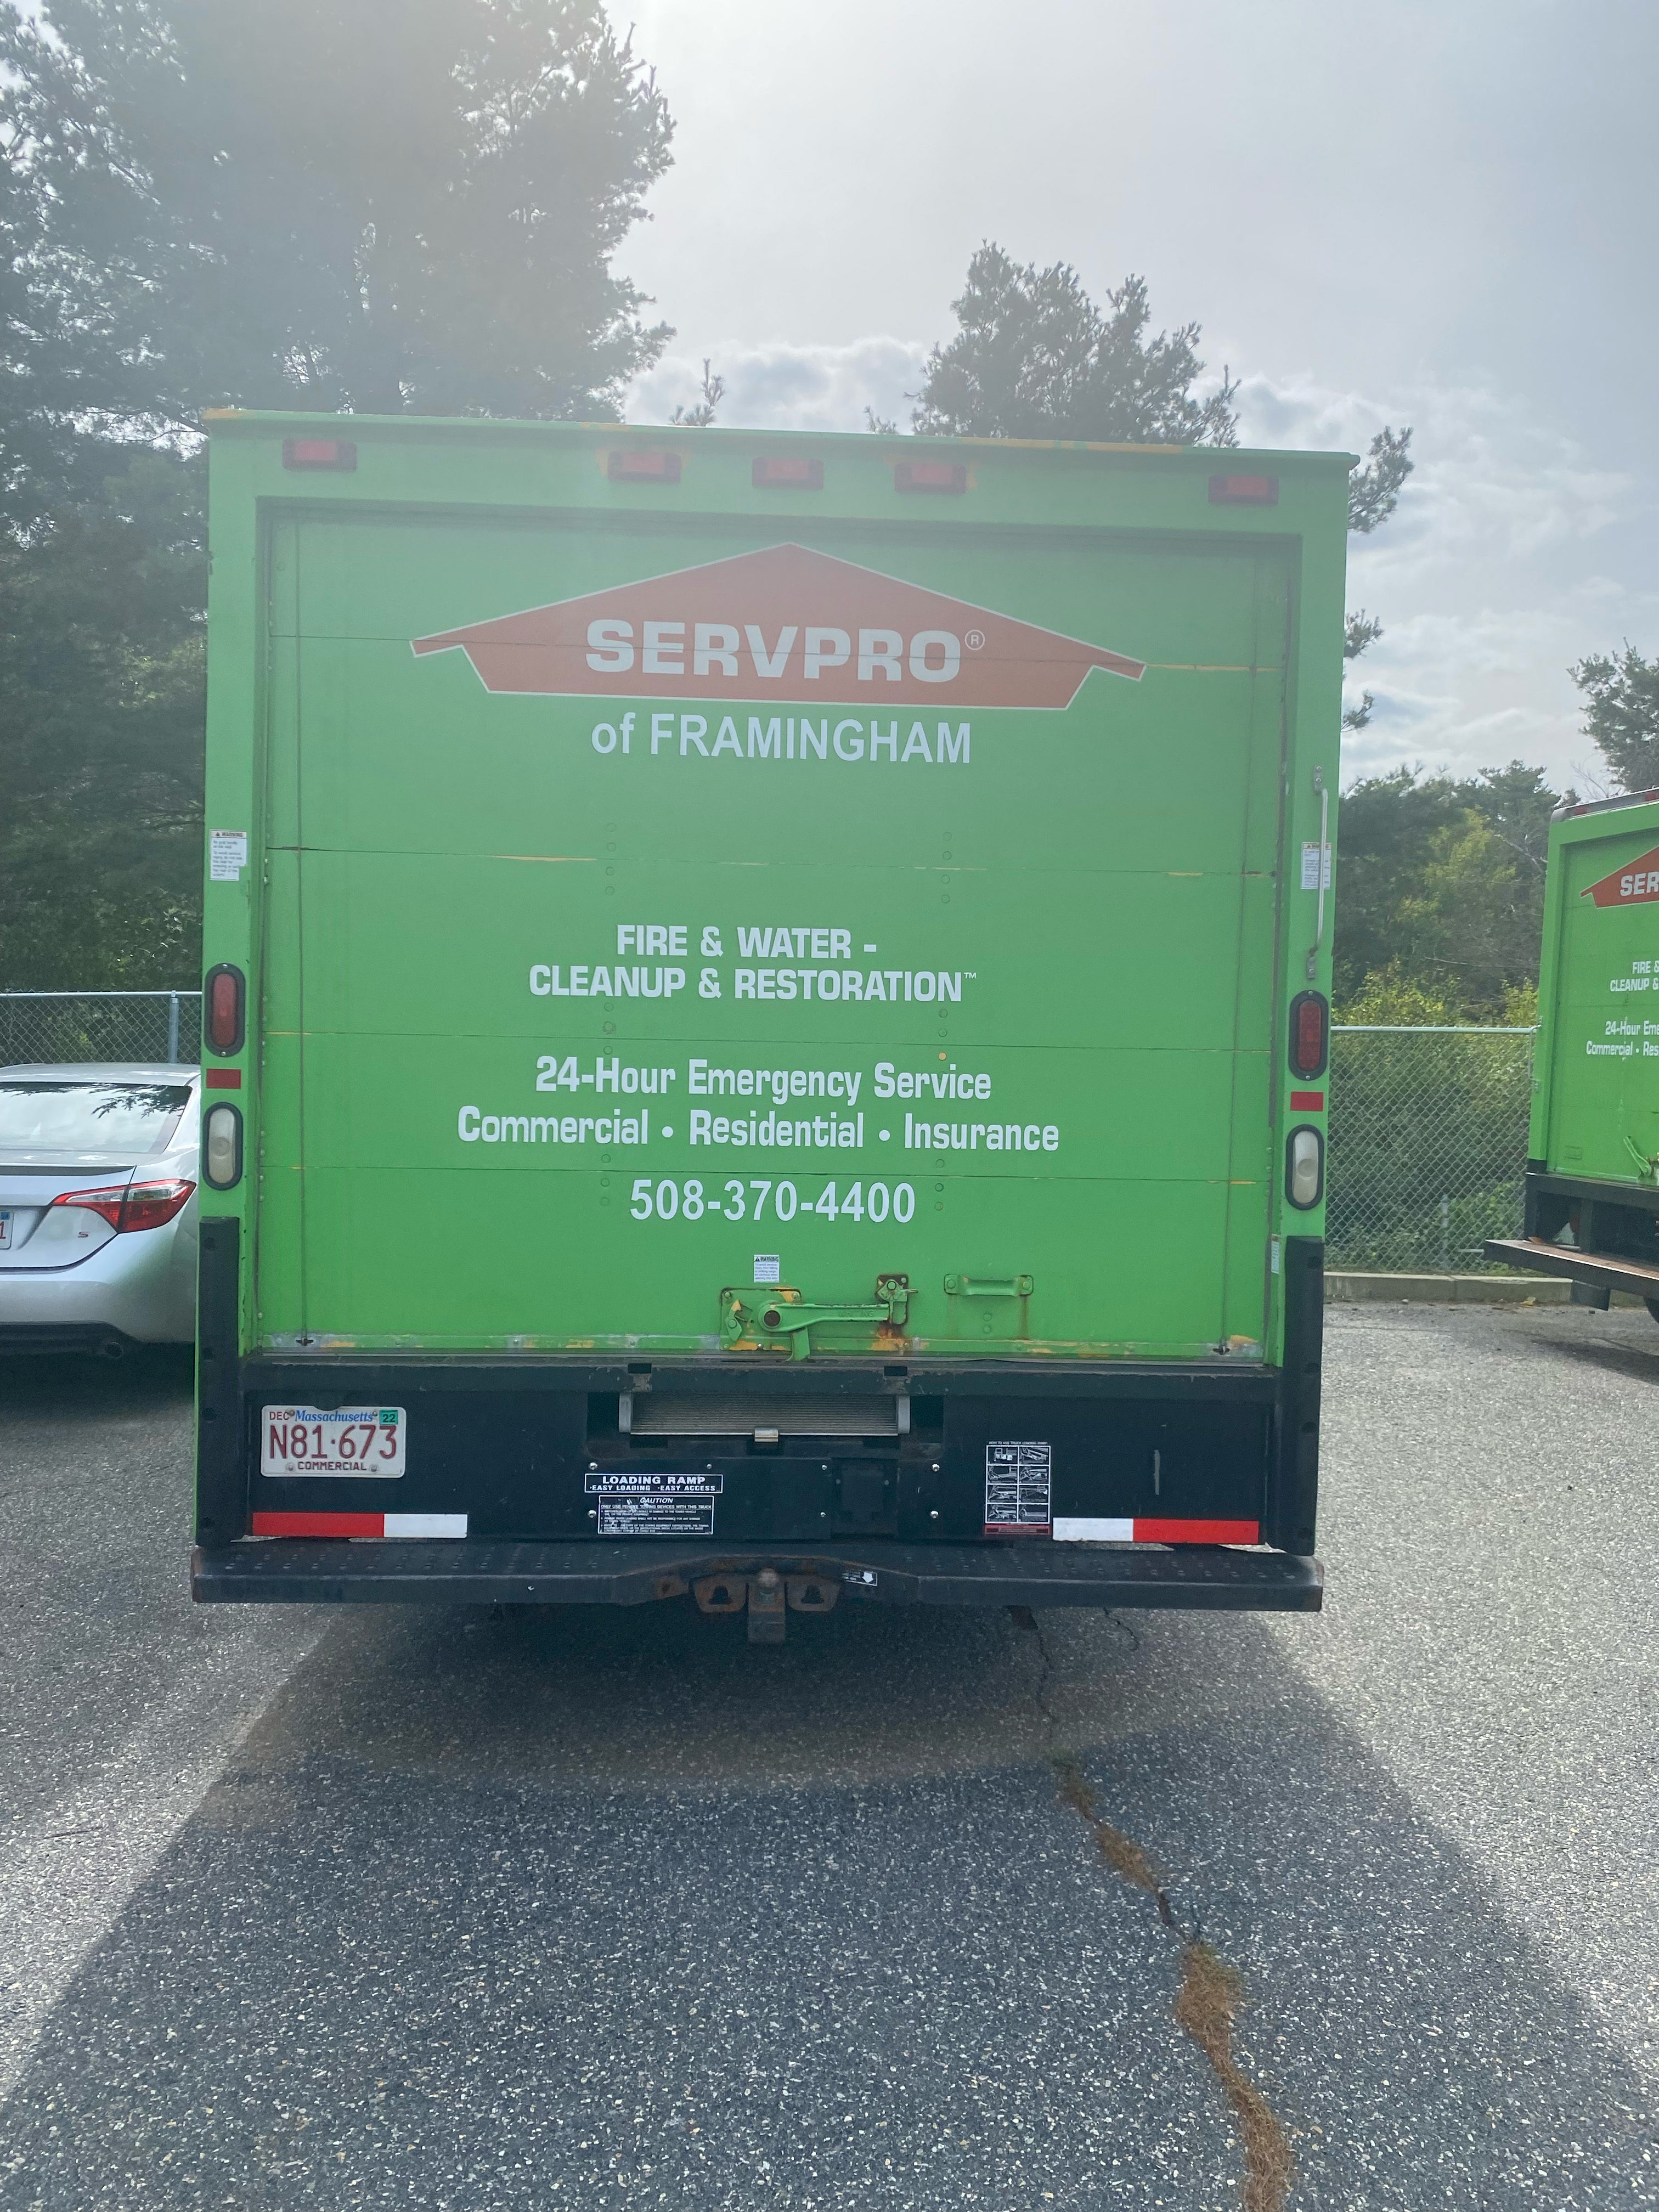 SERVPRO of Foxborough does exactly that not only for the Foxborough community but also the surrounding communities of Franklin, Millis, Wrentham, Bellingham, Walpole, Norfolk and Wethersfield.